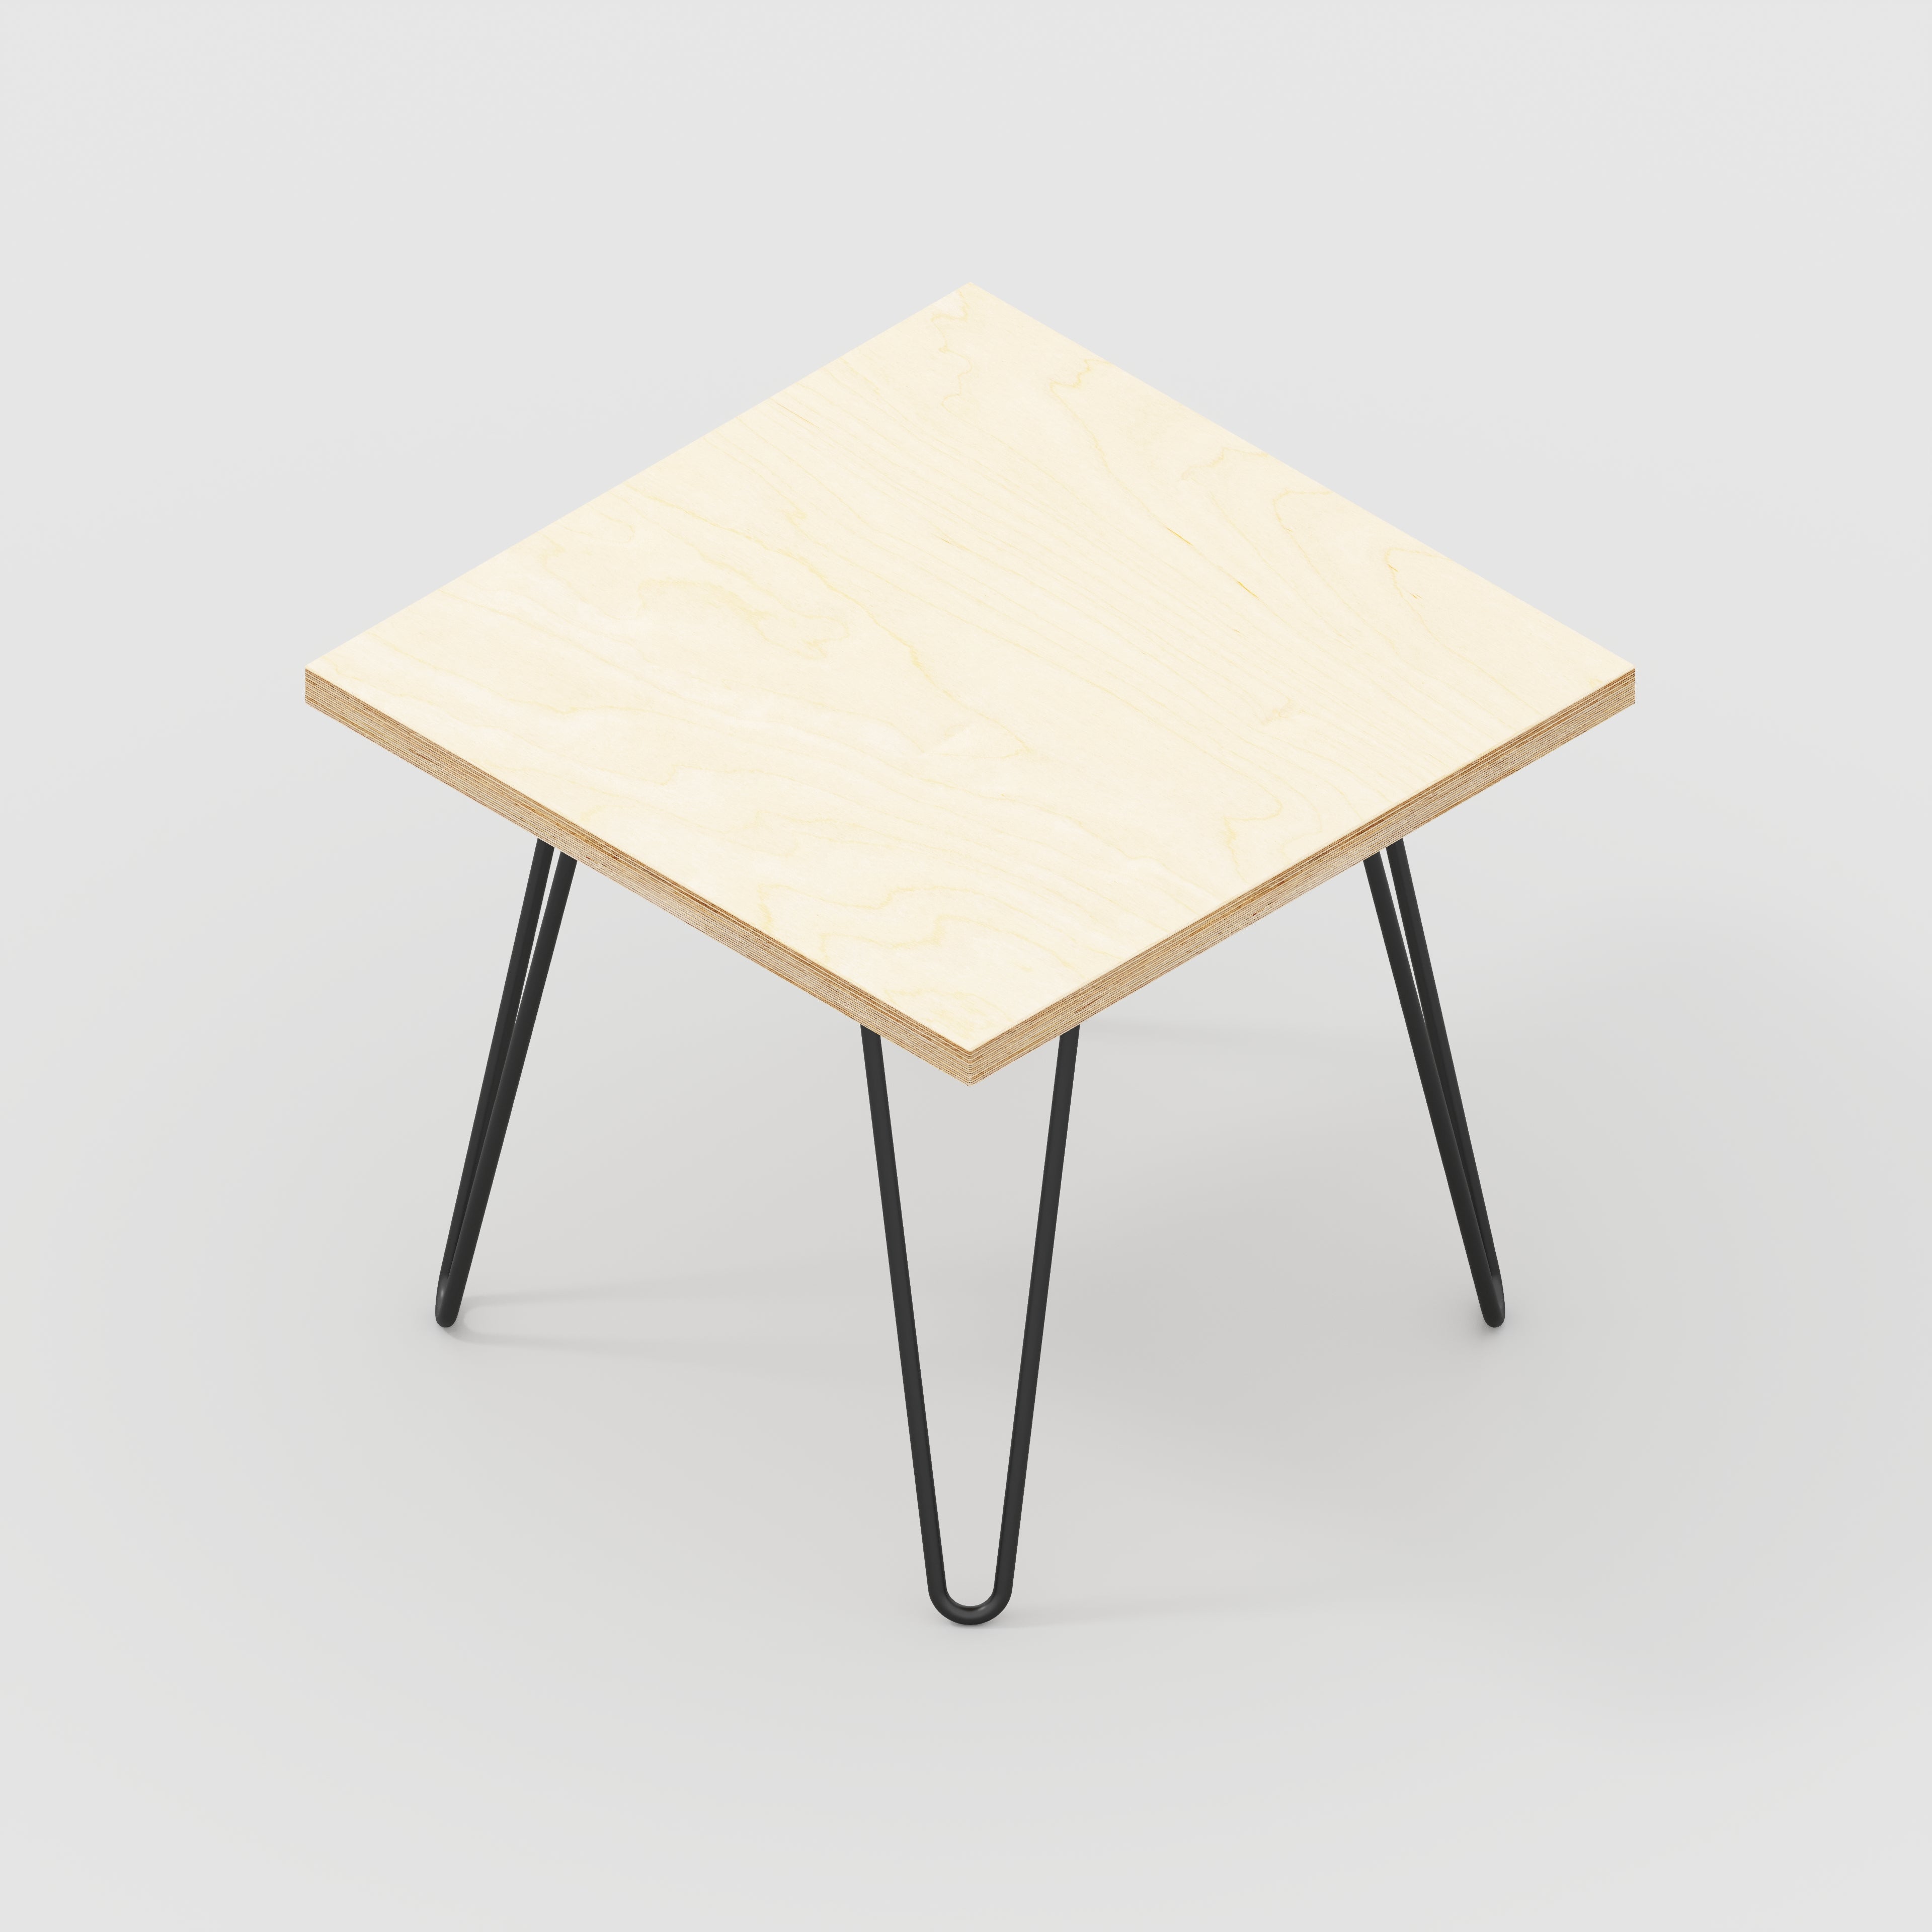 Side Table with Black Hairpin Legs - Plywood Birch - 500(w) x 500(d) x 425(h)